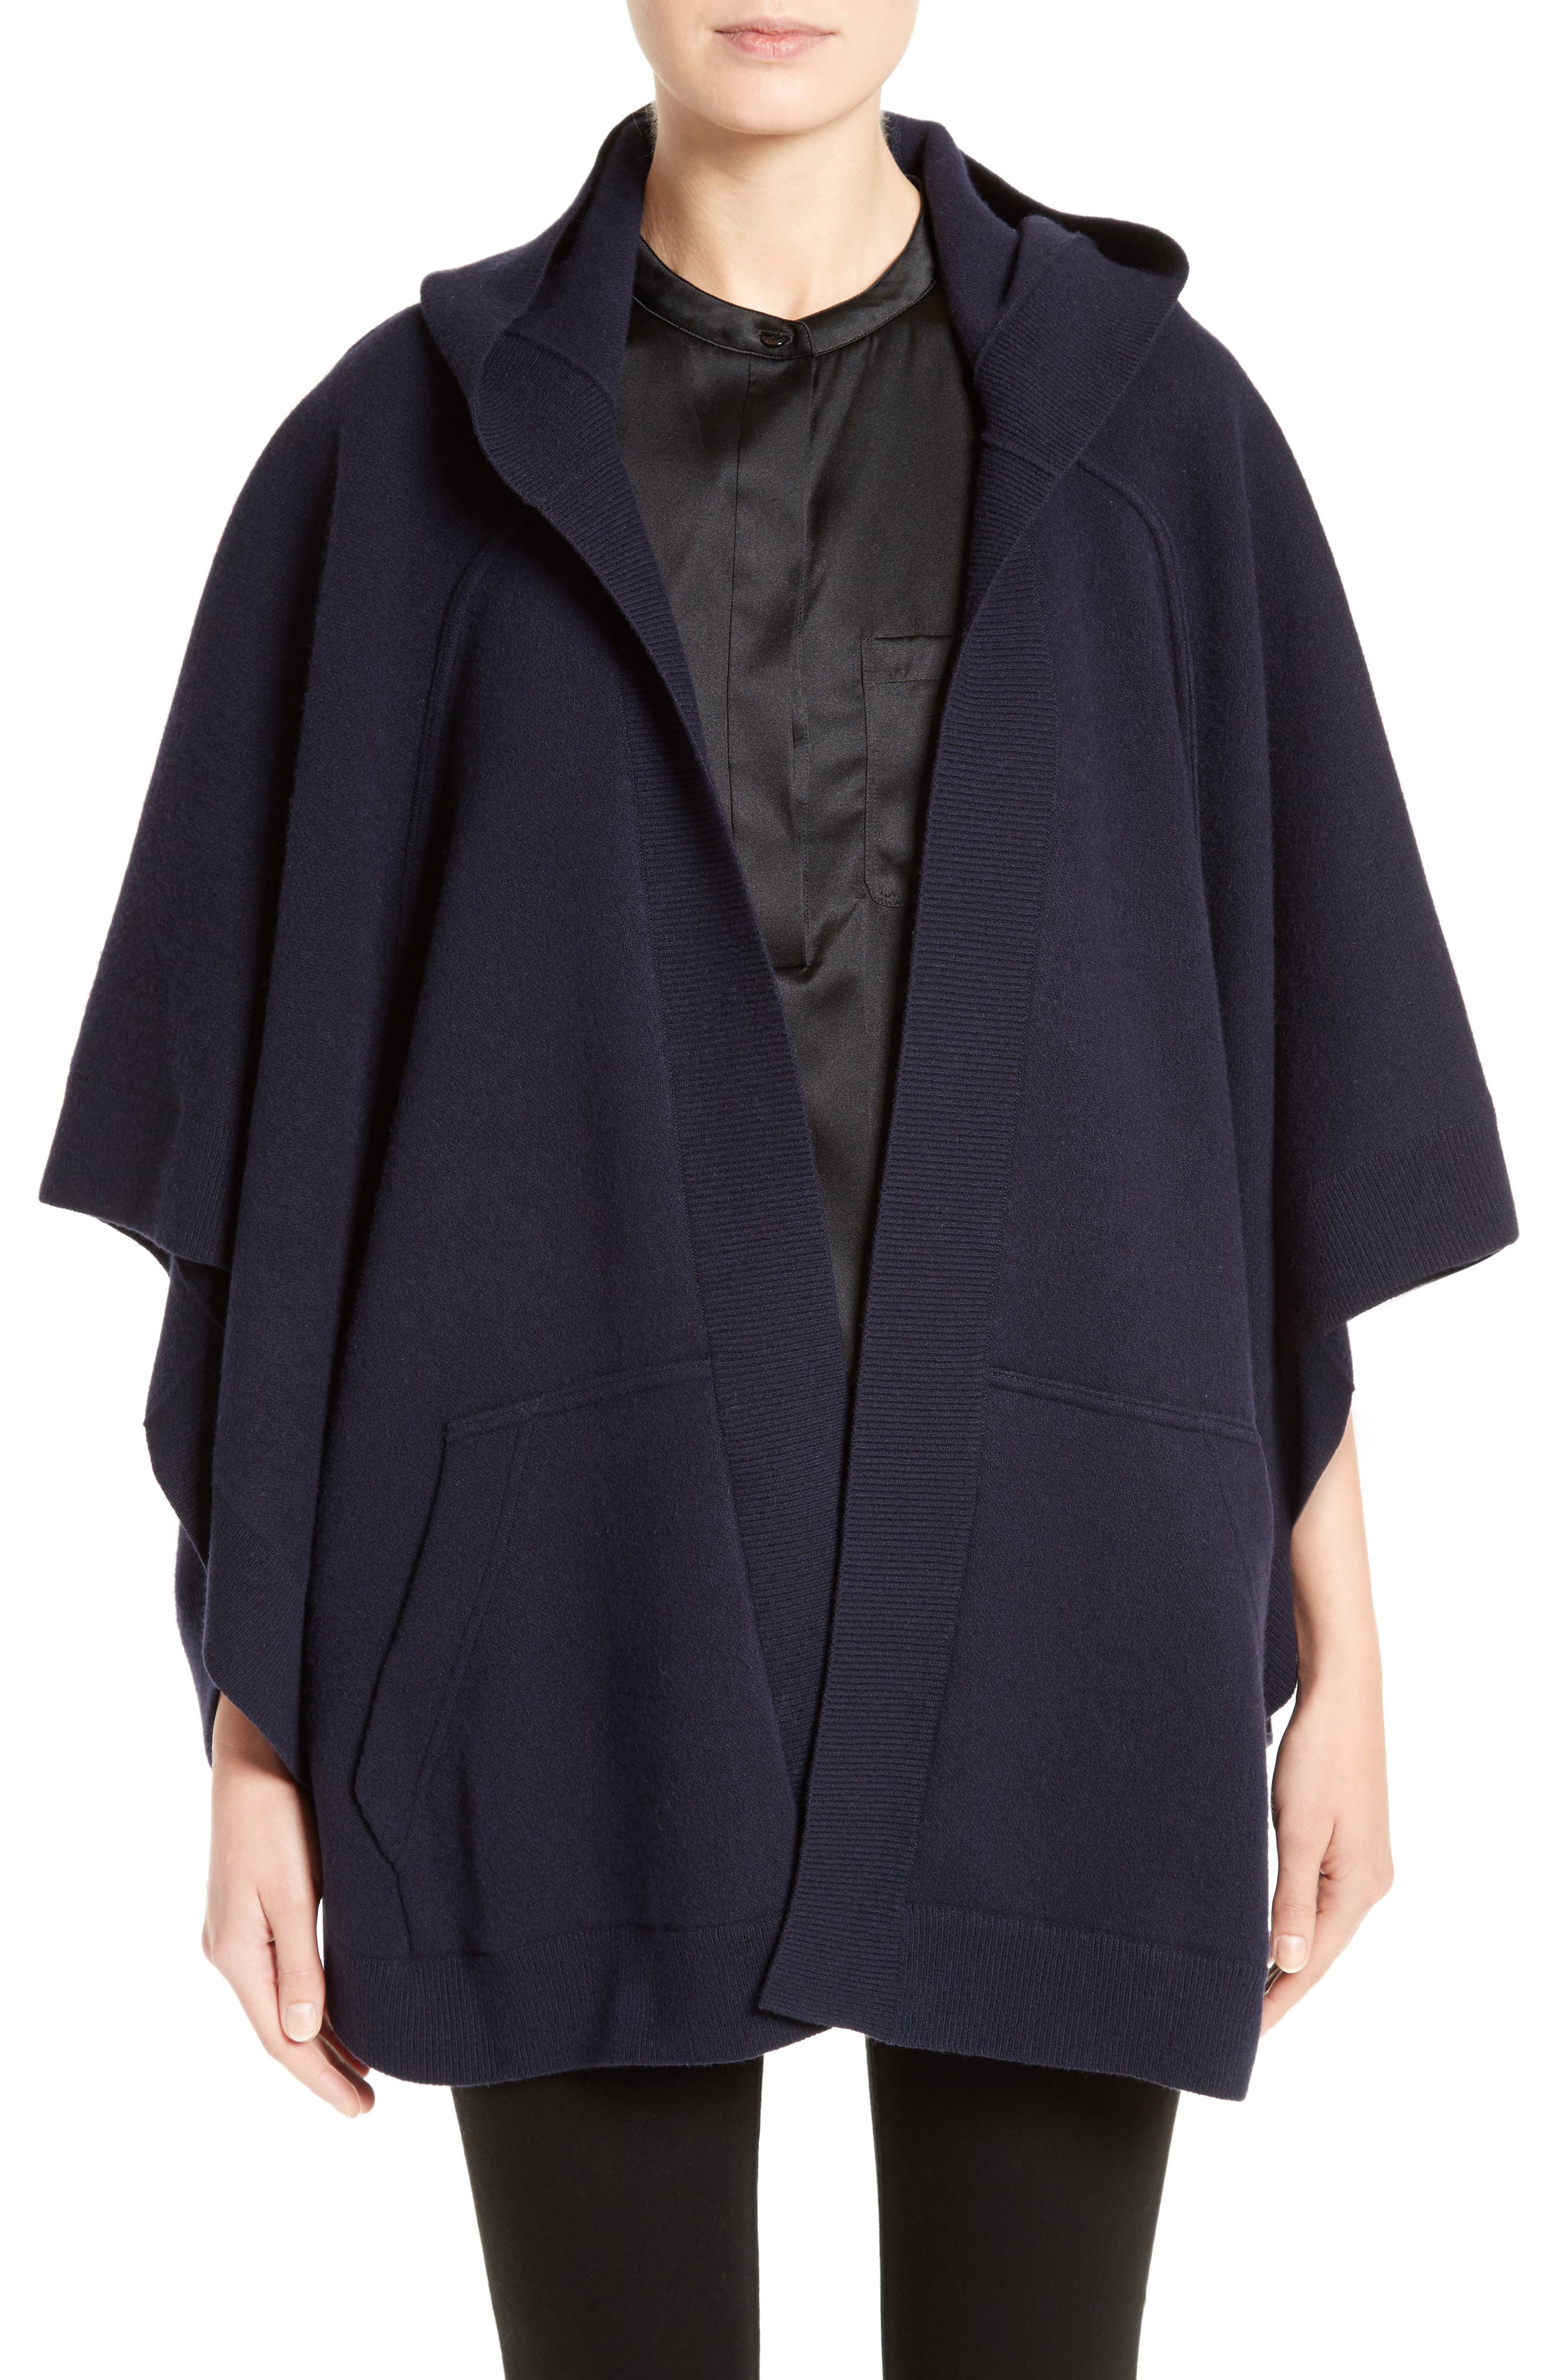 Burberry Carla Hooded Knit Poncho 